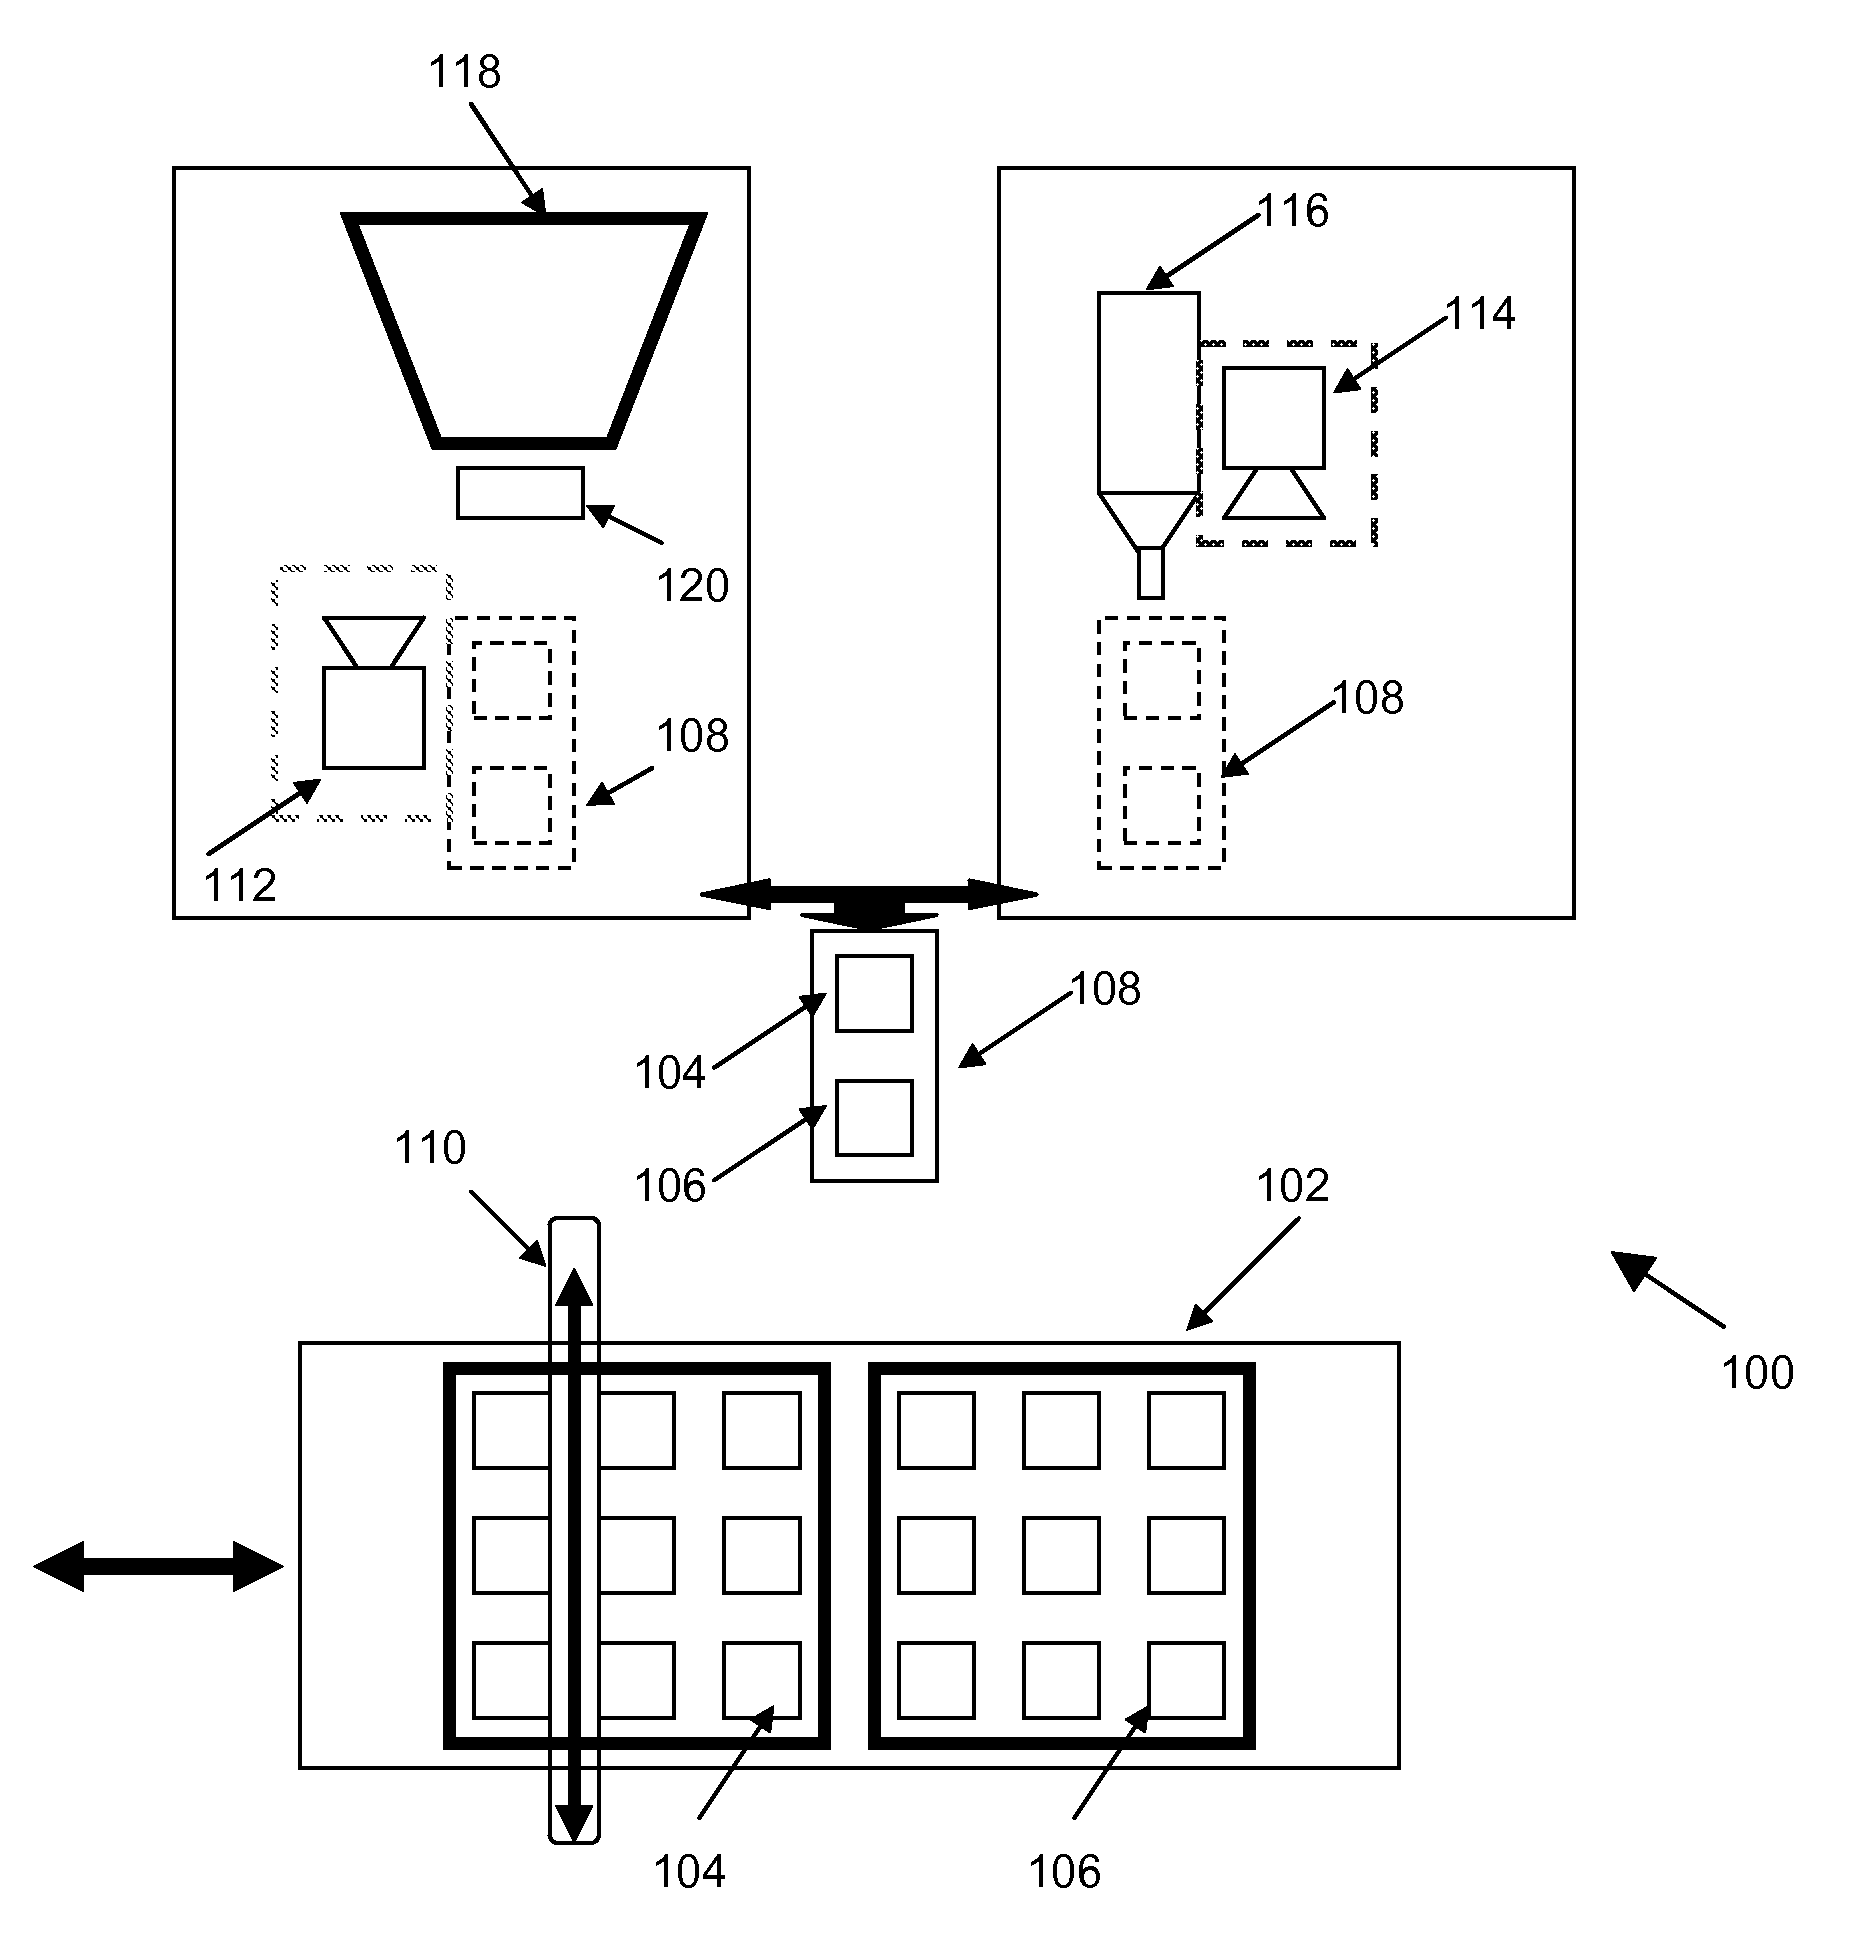 Apparatus for assembling a lens module and an image sensor to form a camera module, and a method of assembling the same